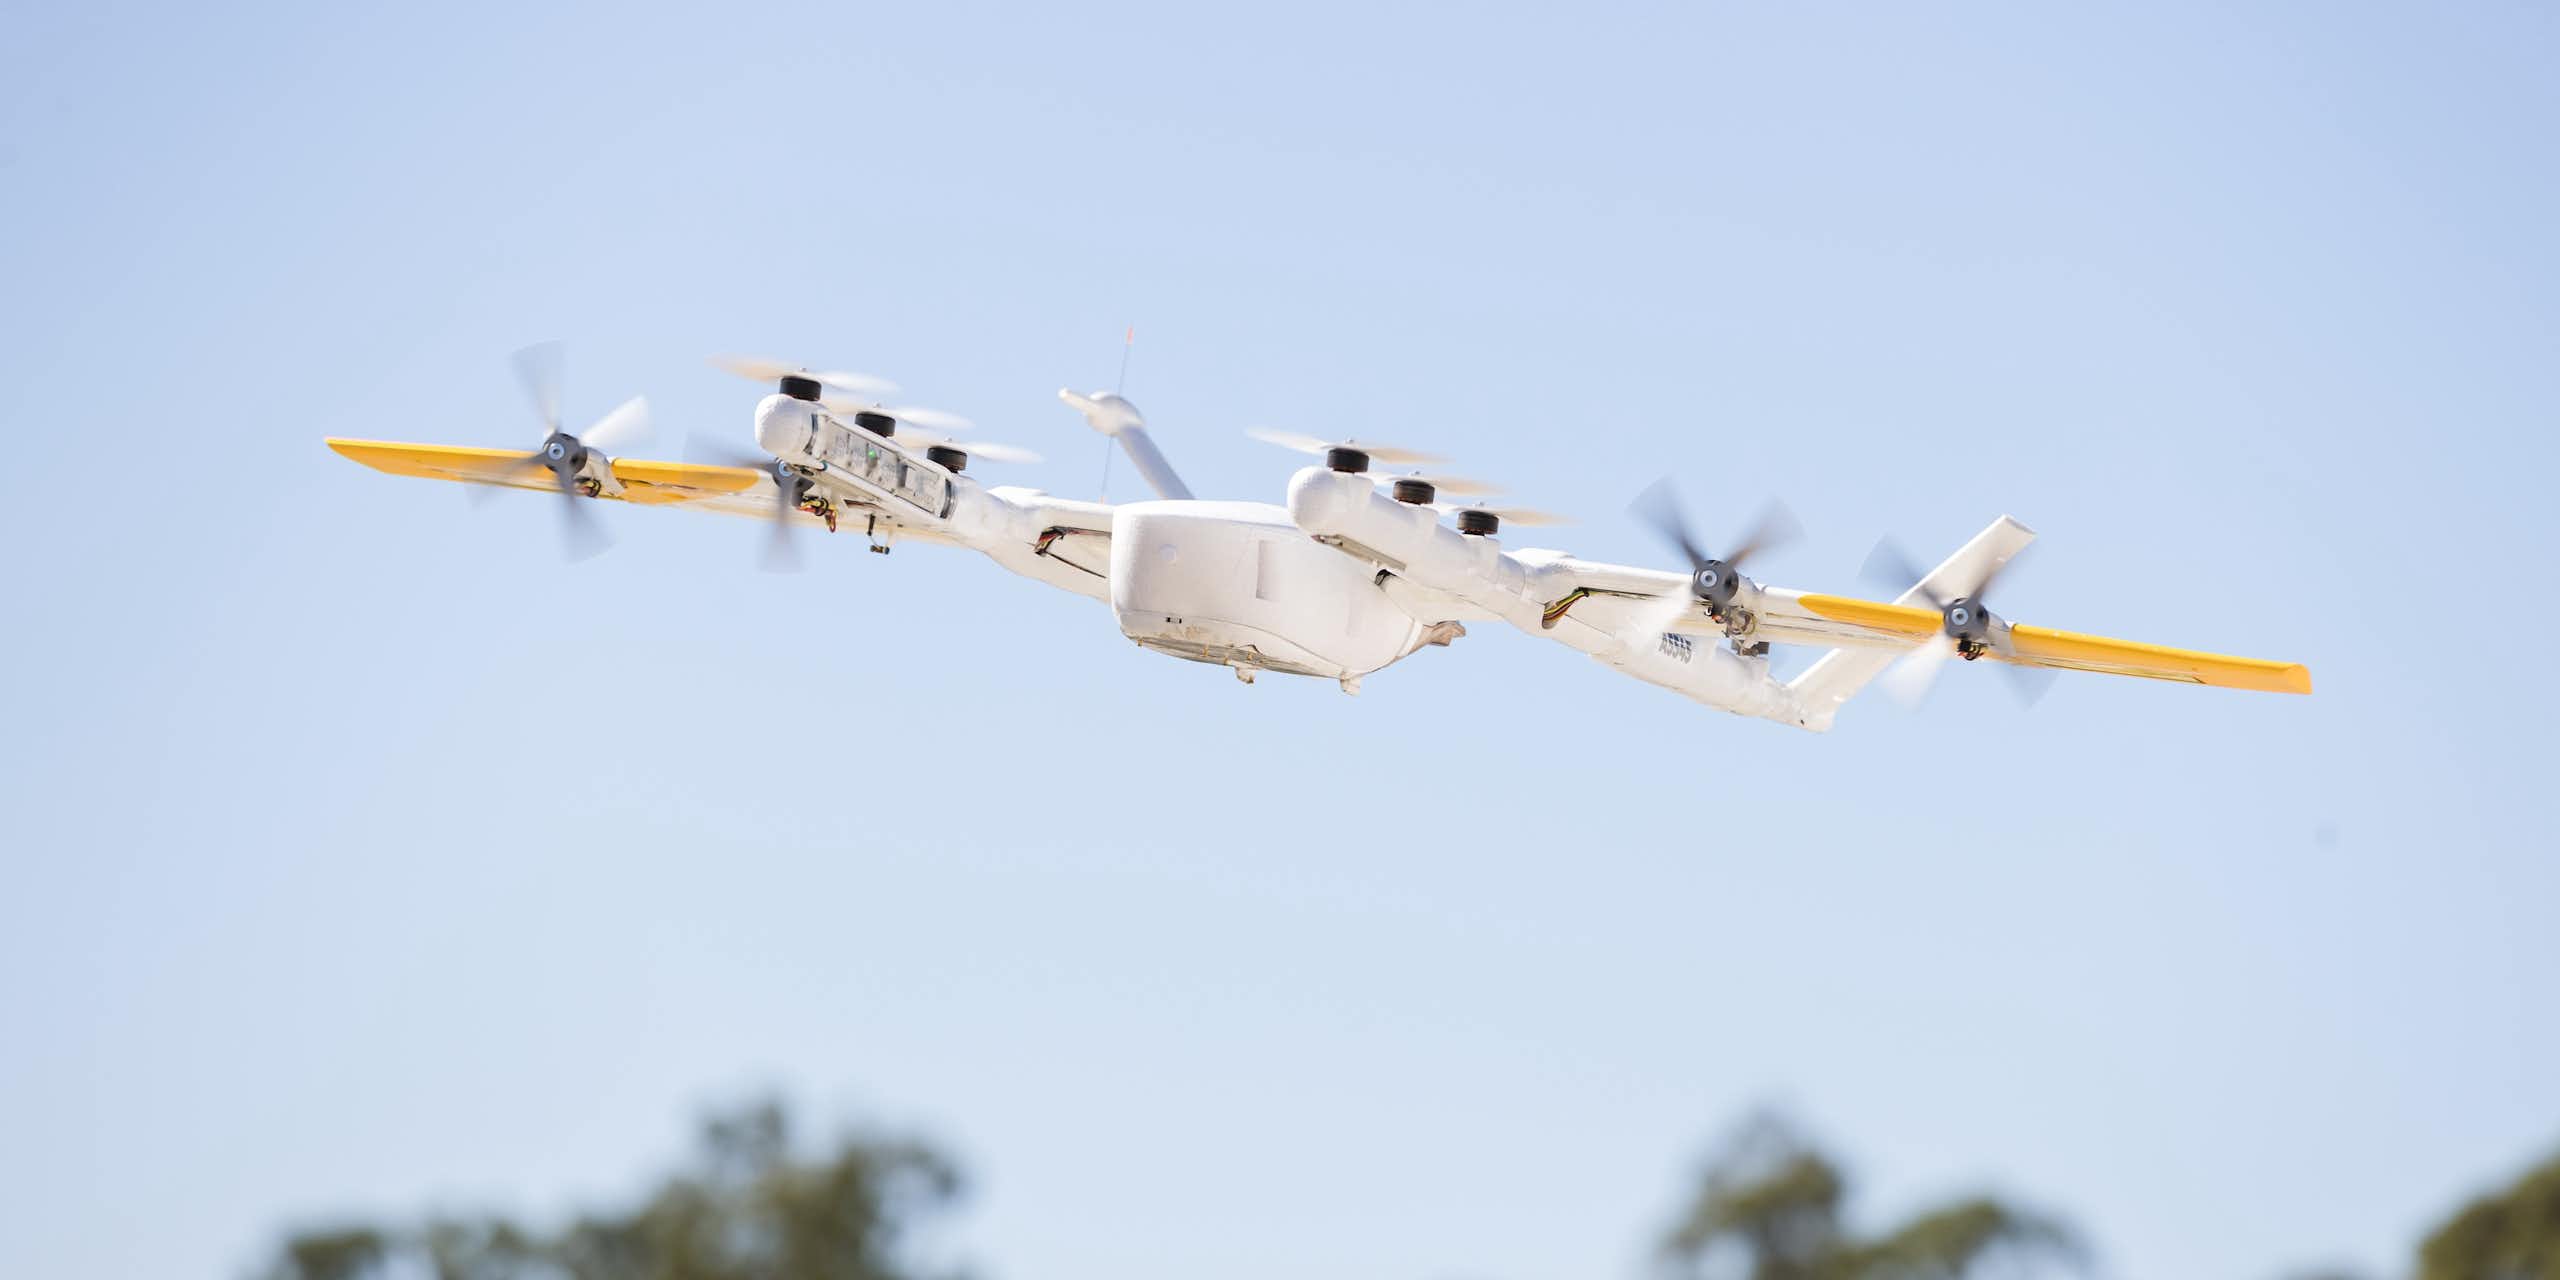 Photo of a small drone aircraft in flight.